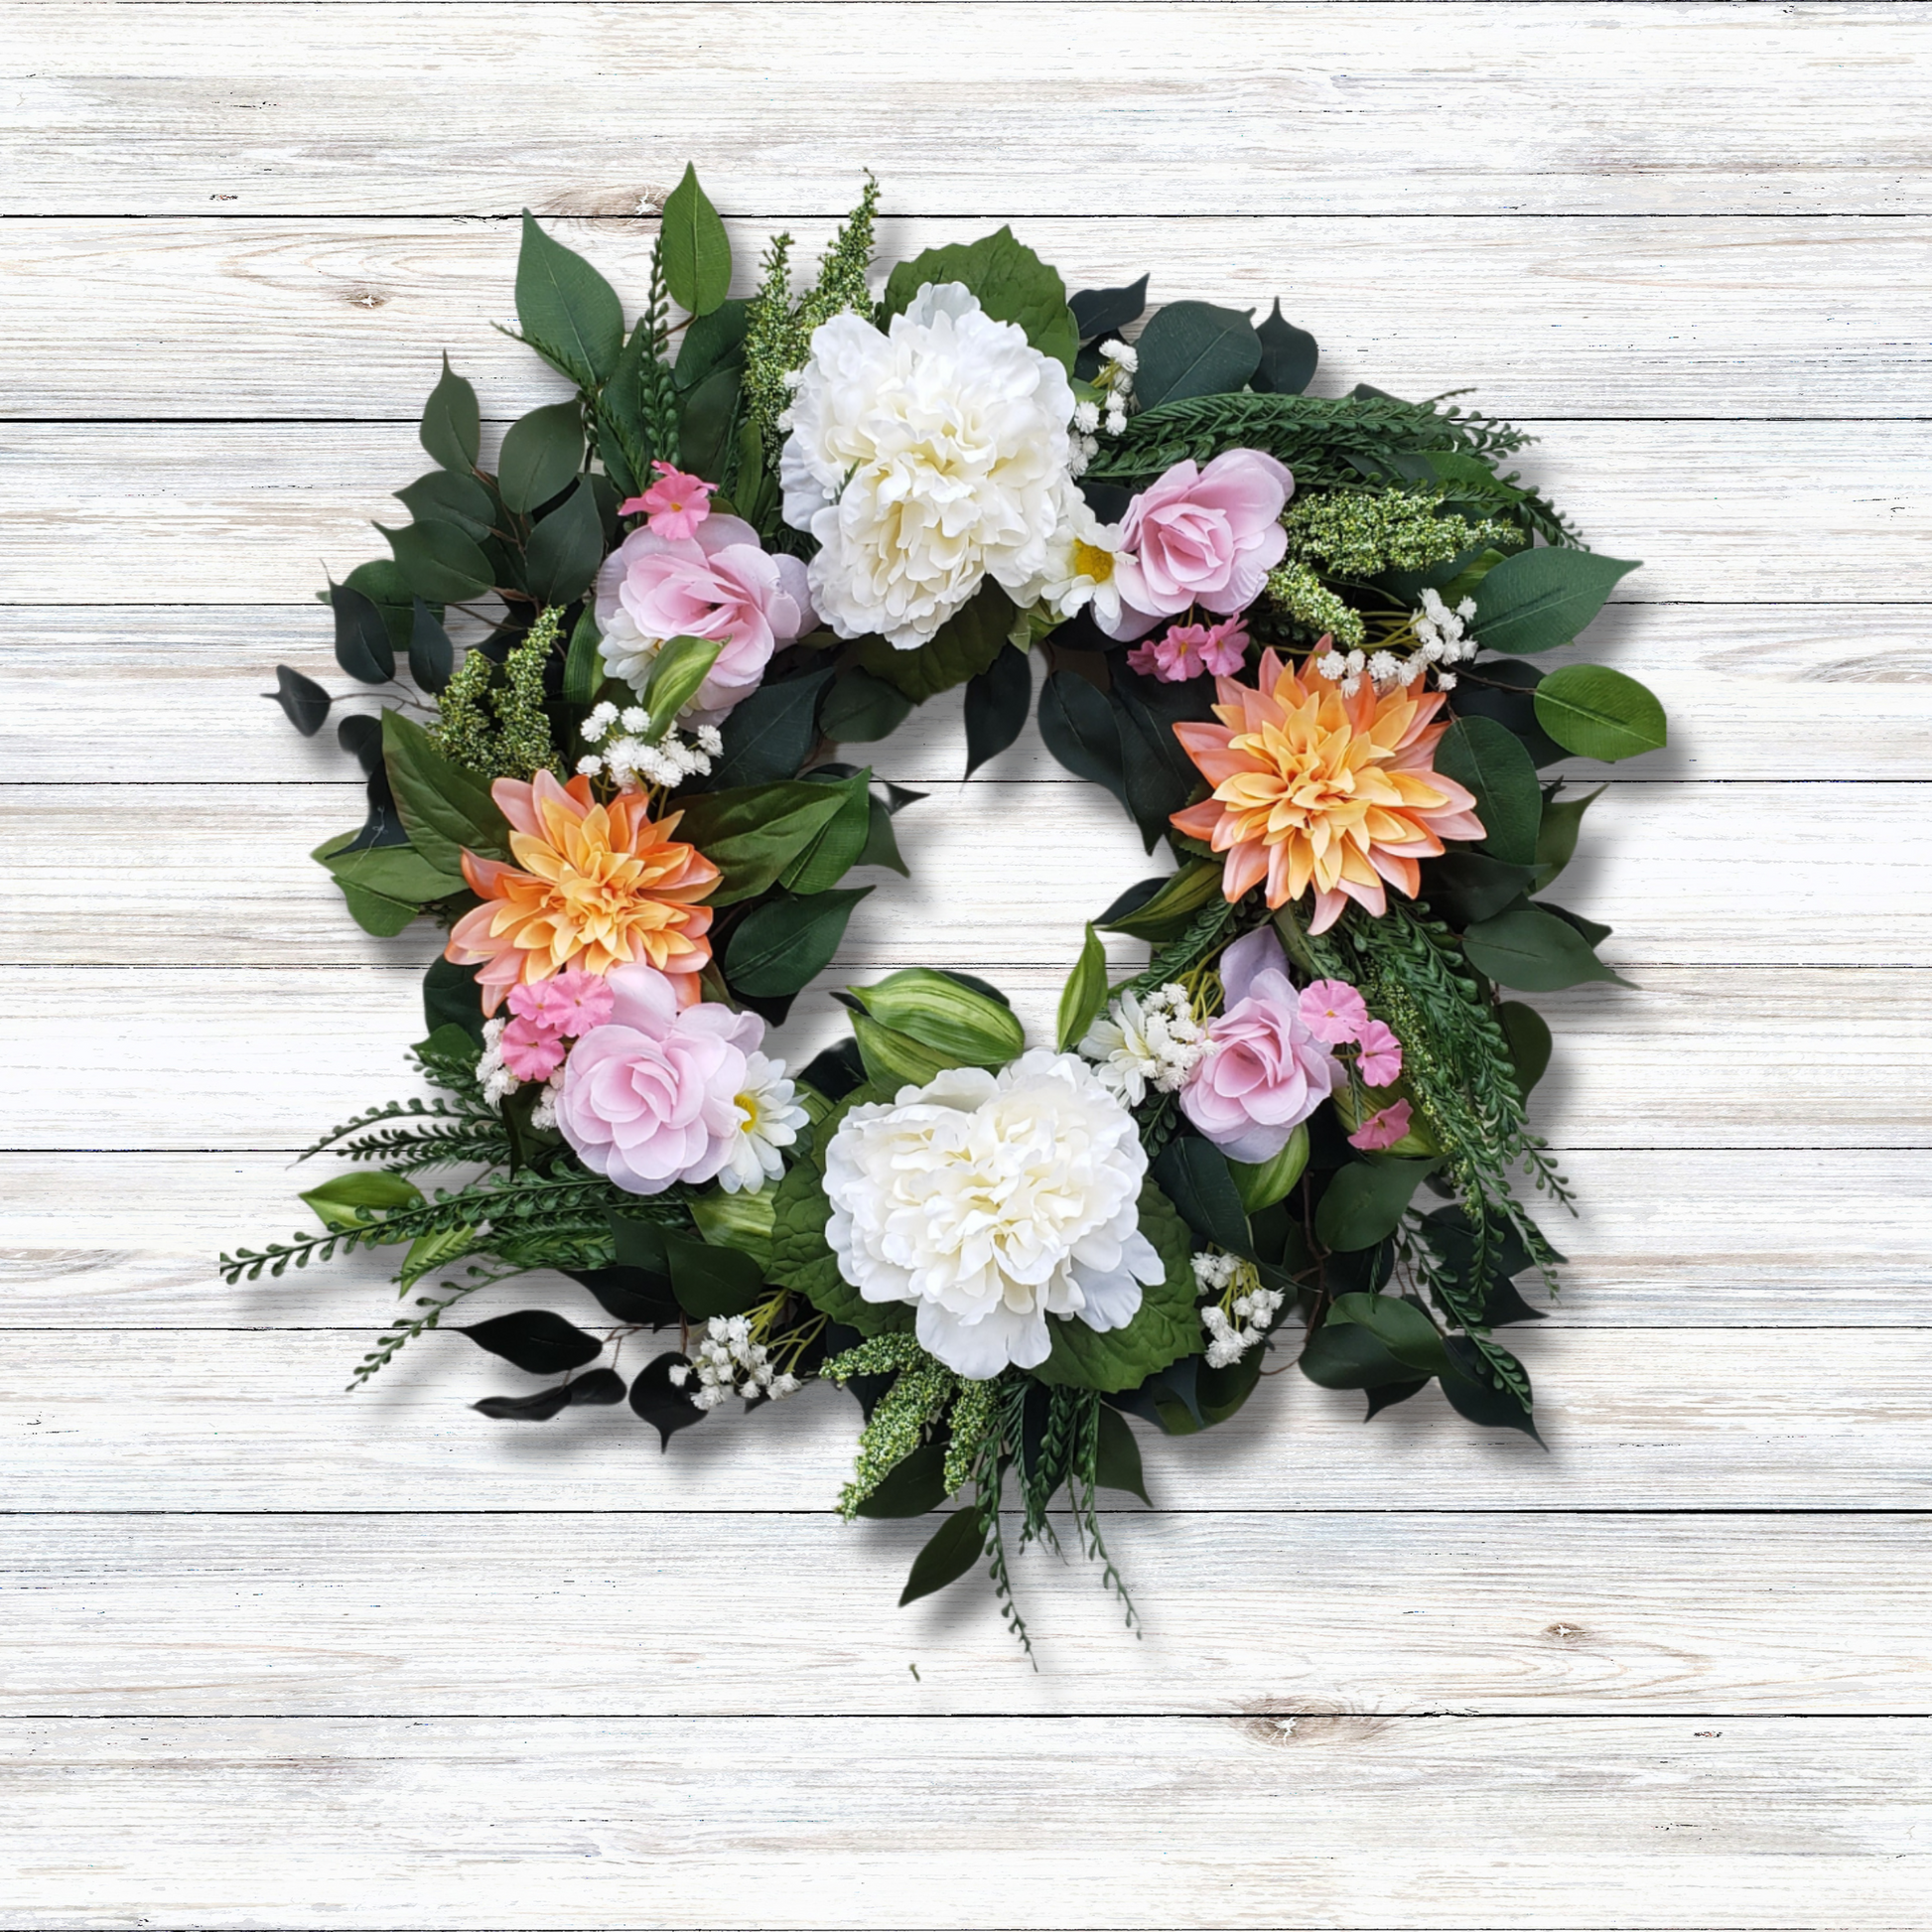 Farmhouse Style Floral Wreath, front view.